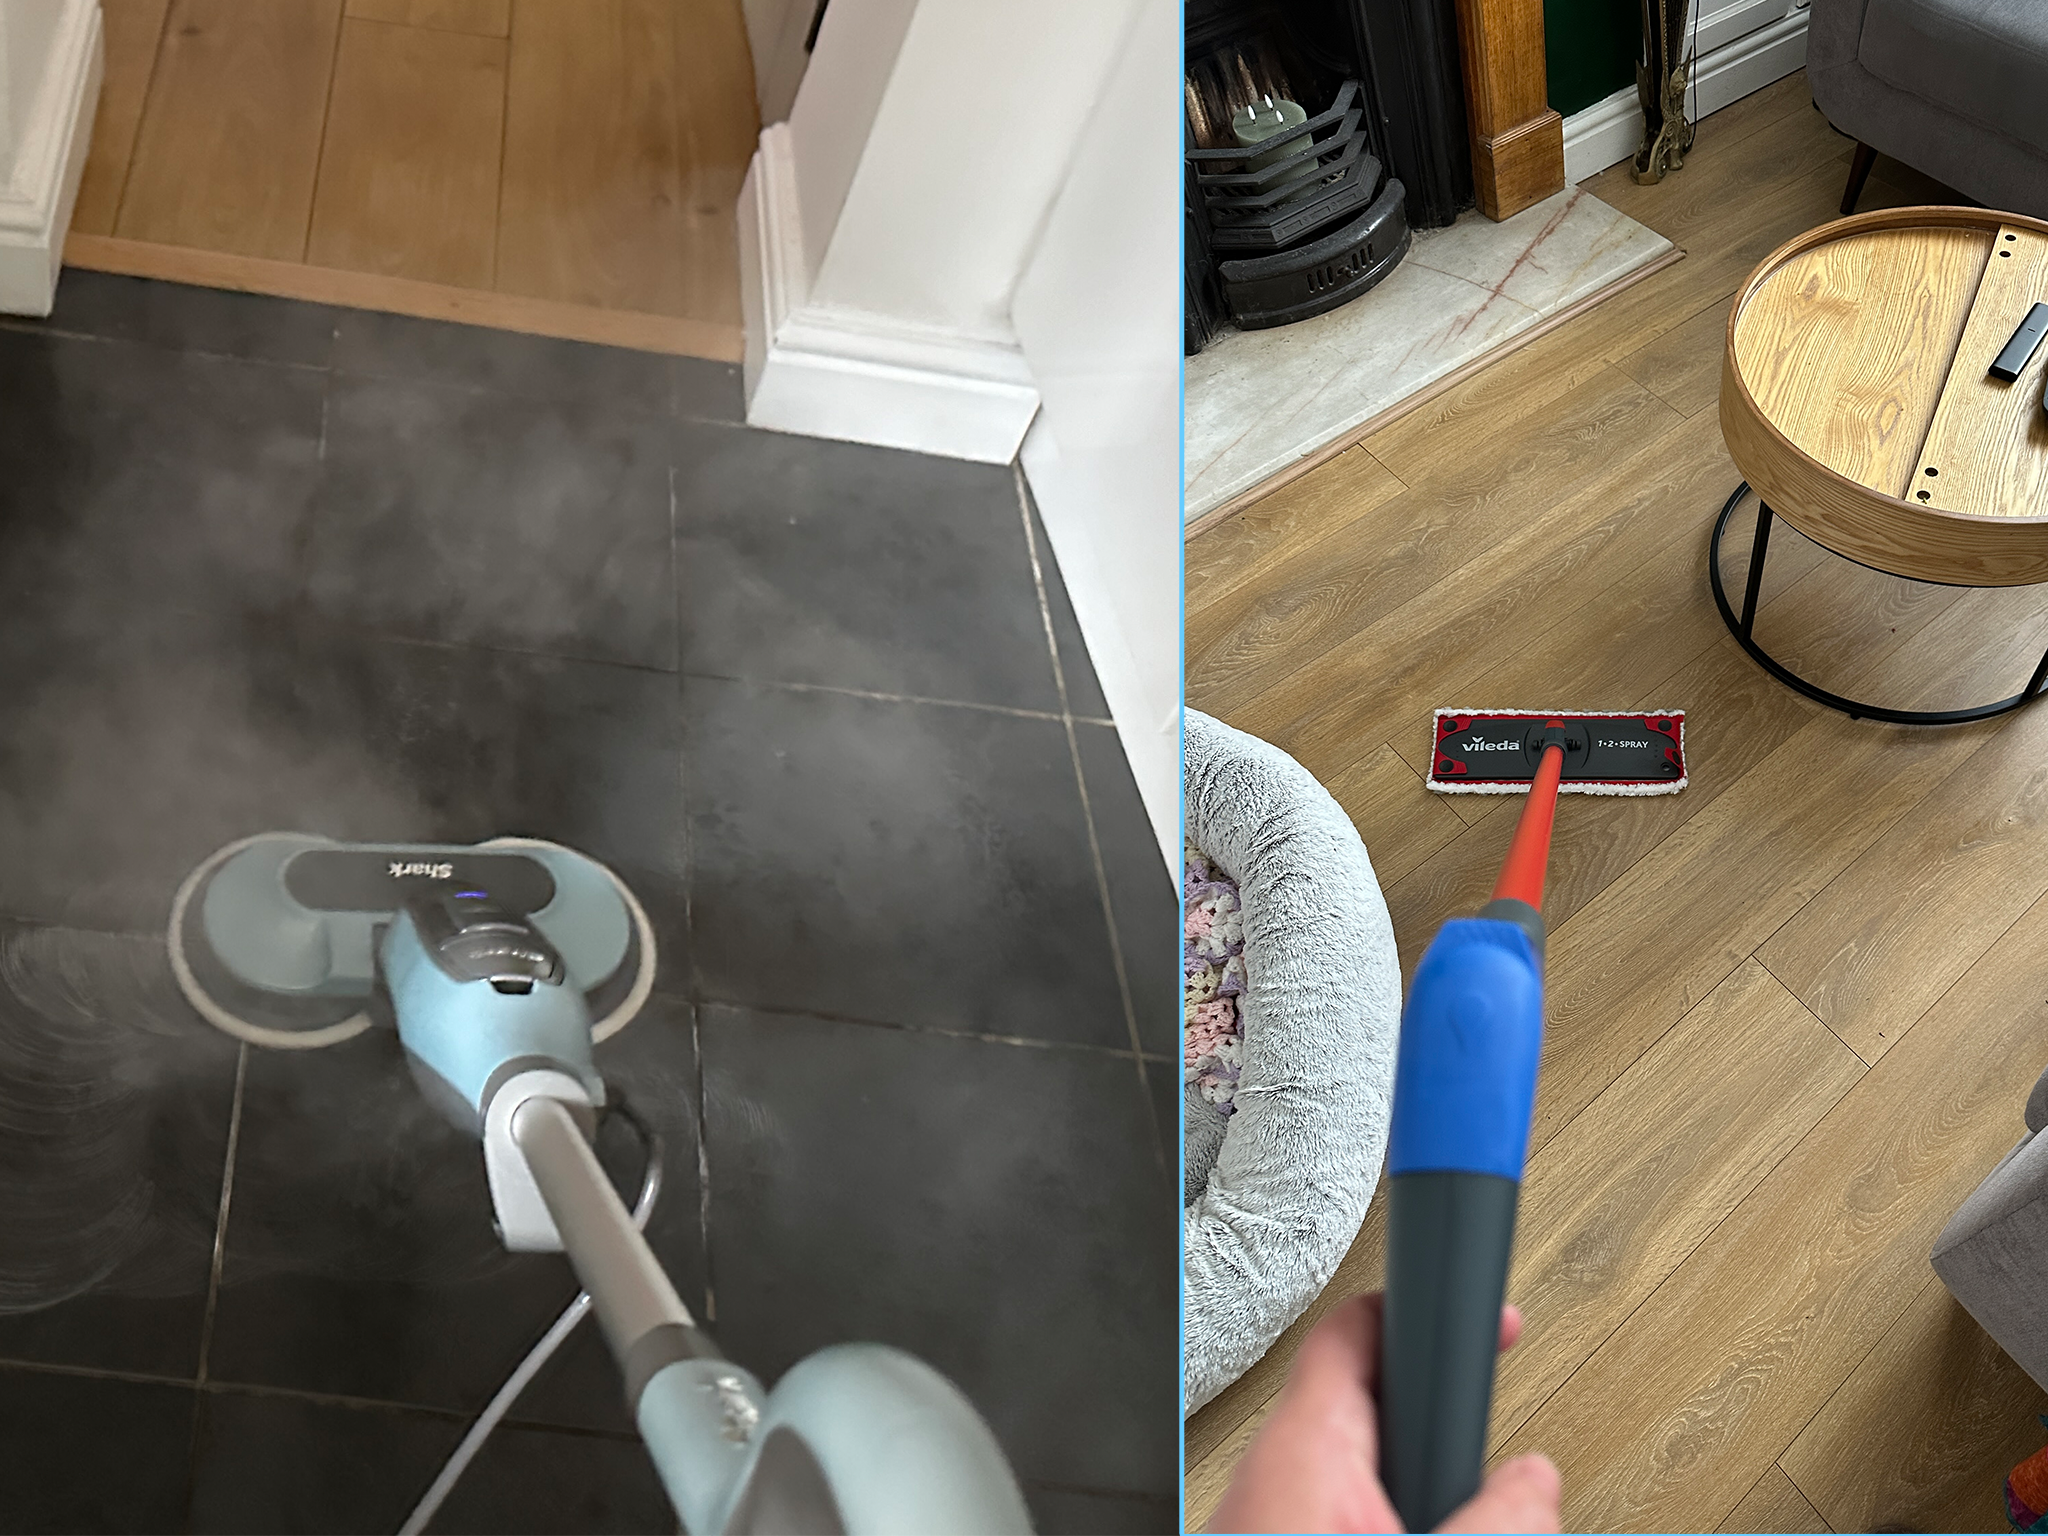 We took each of the mops for a spin on a range of flooring types